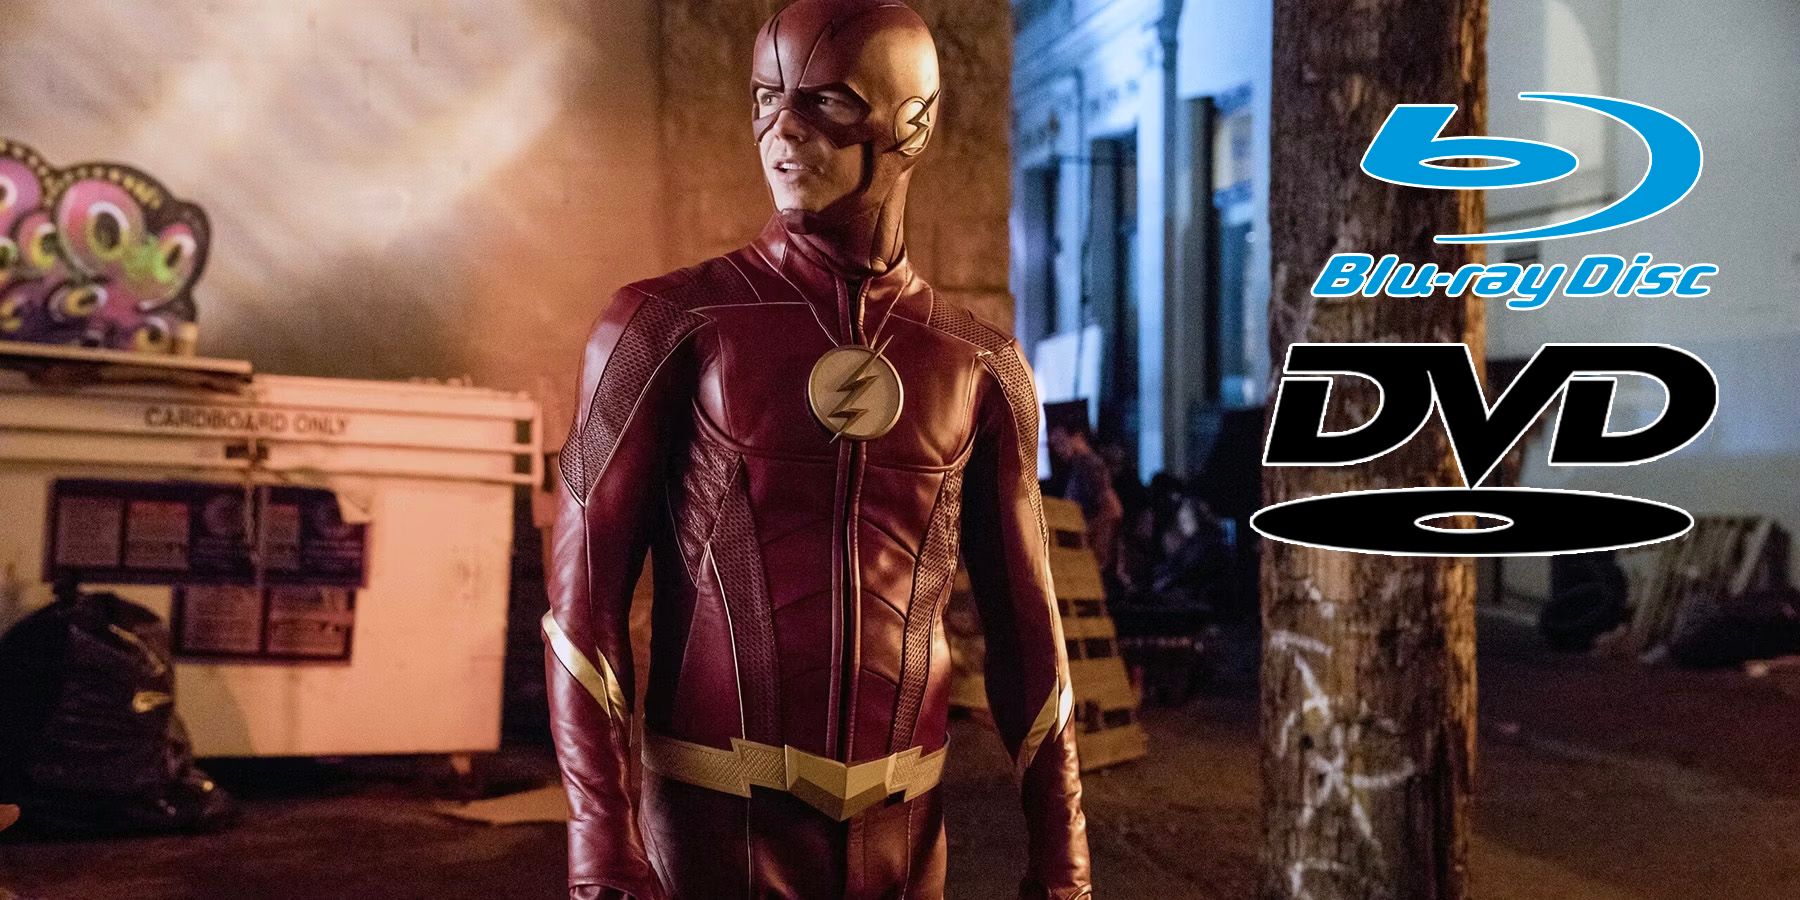 The Flash: The Ninth And Final Season' & 'The Flash: The Complete Series';  Arriving On Blu-ray & DVD August 29, 2023 From DC - Warner Bros